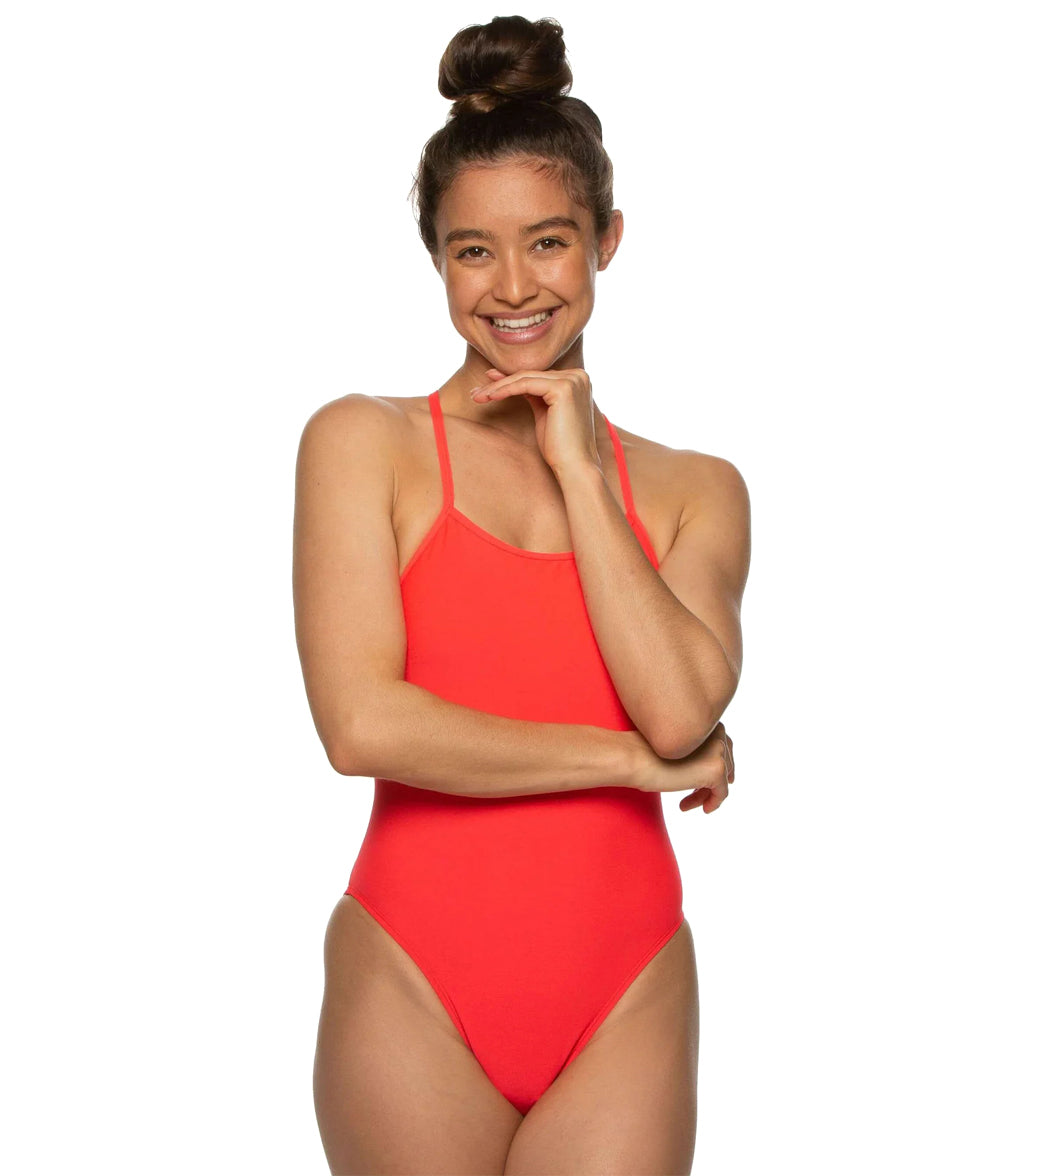 Shop Best-selling Women's Bathing Suits and Athletic Bikinis – Page 2 –  JOLYN